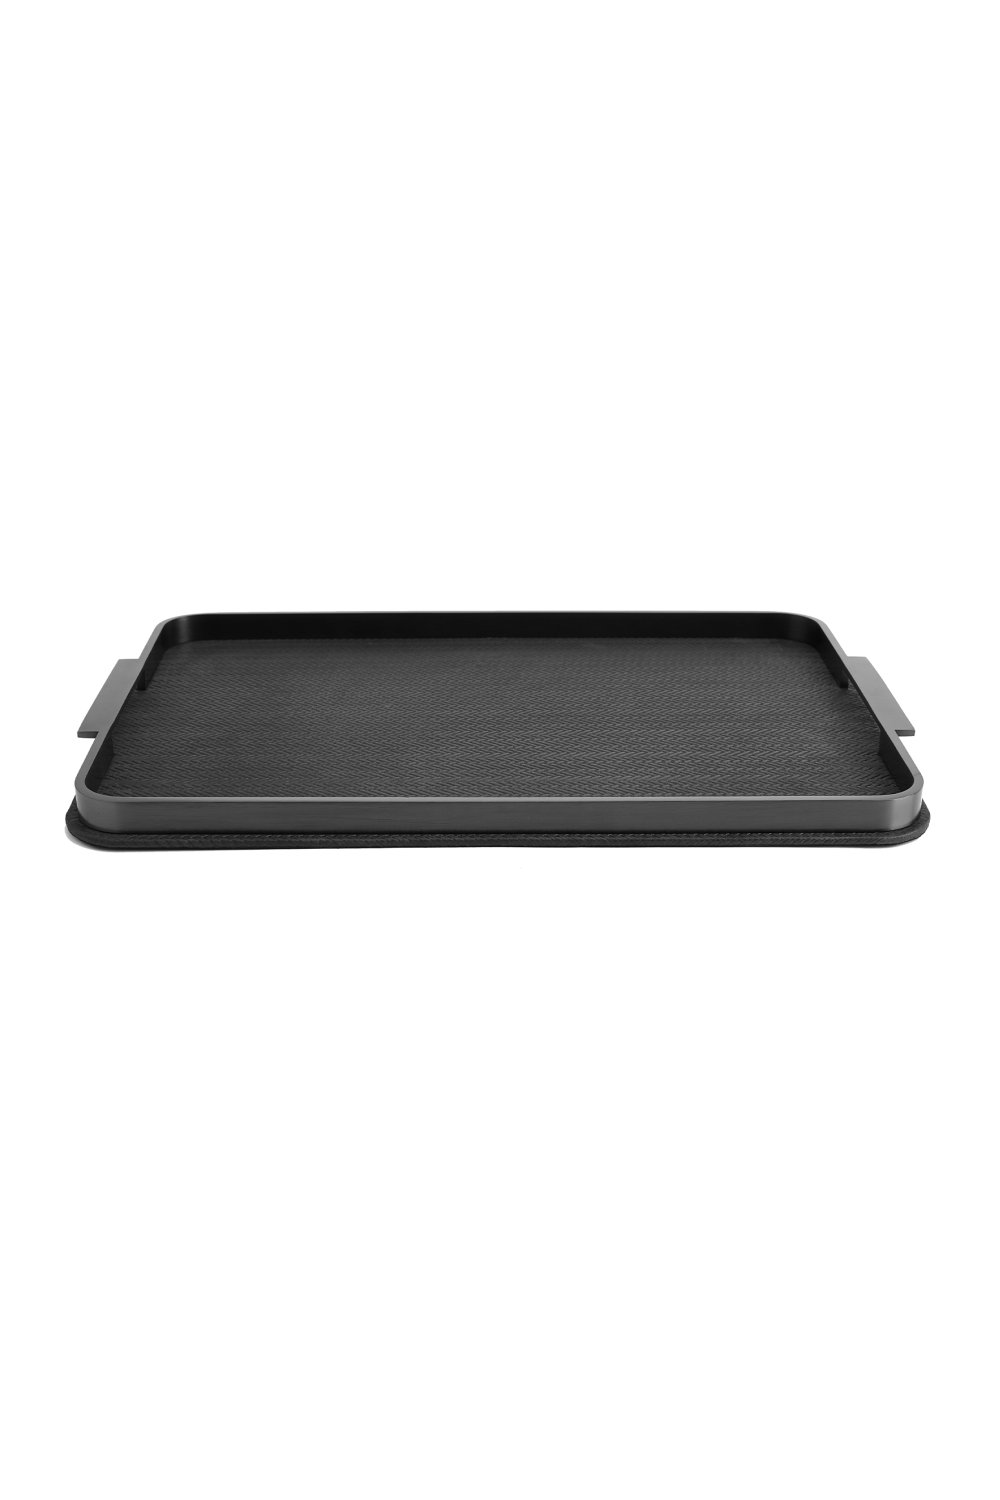 Embossed Leather Tray | Liang & Eimil Gala | OROA.com